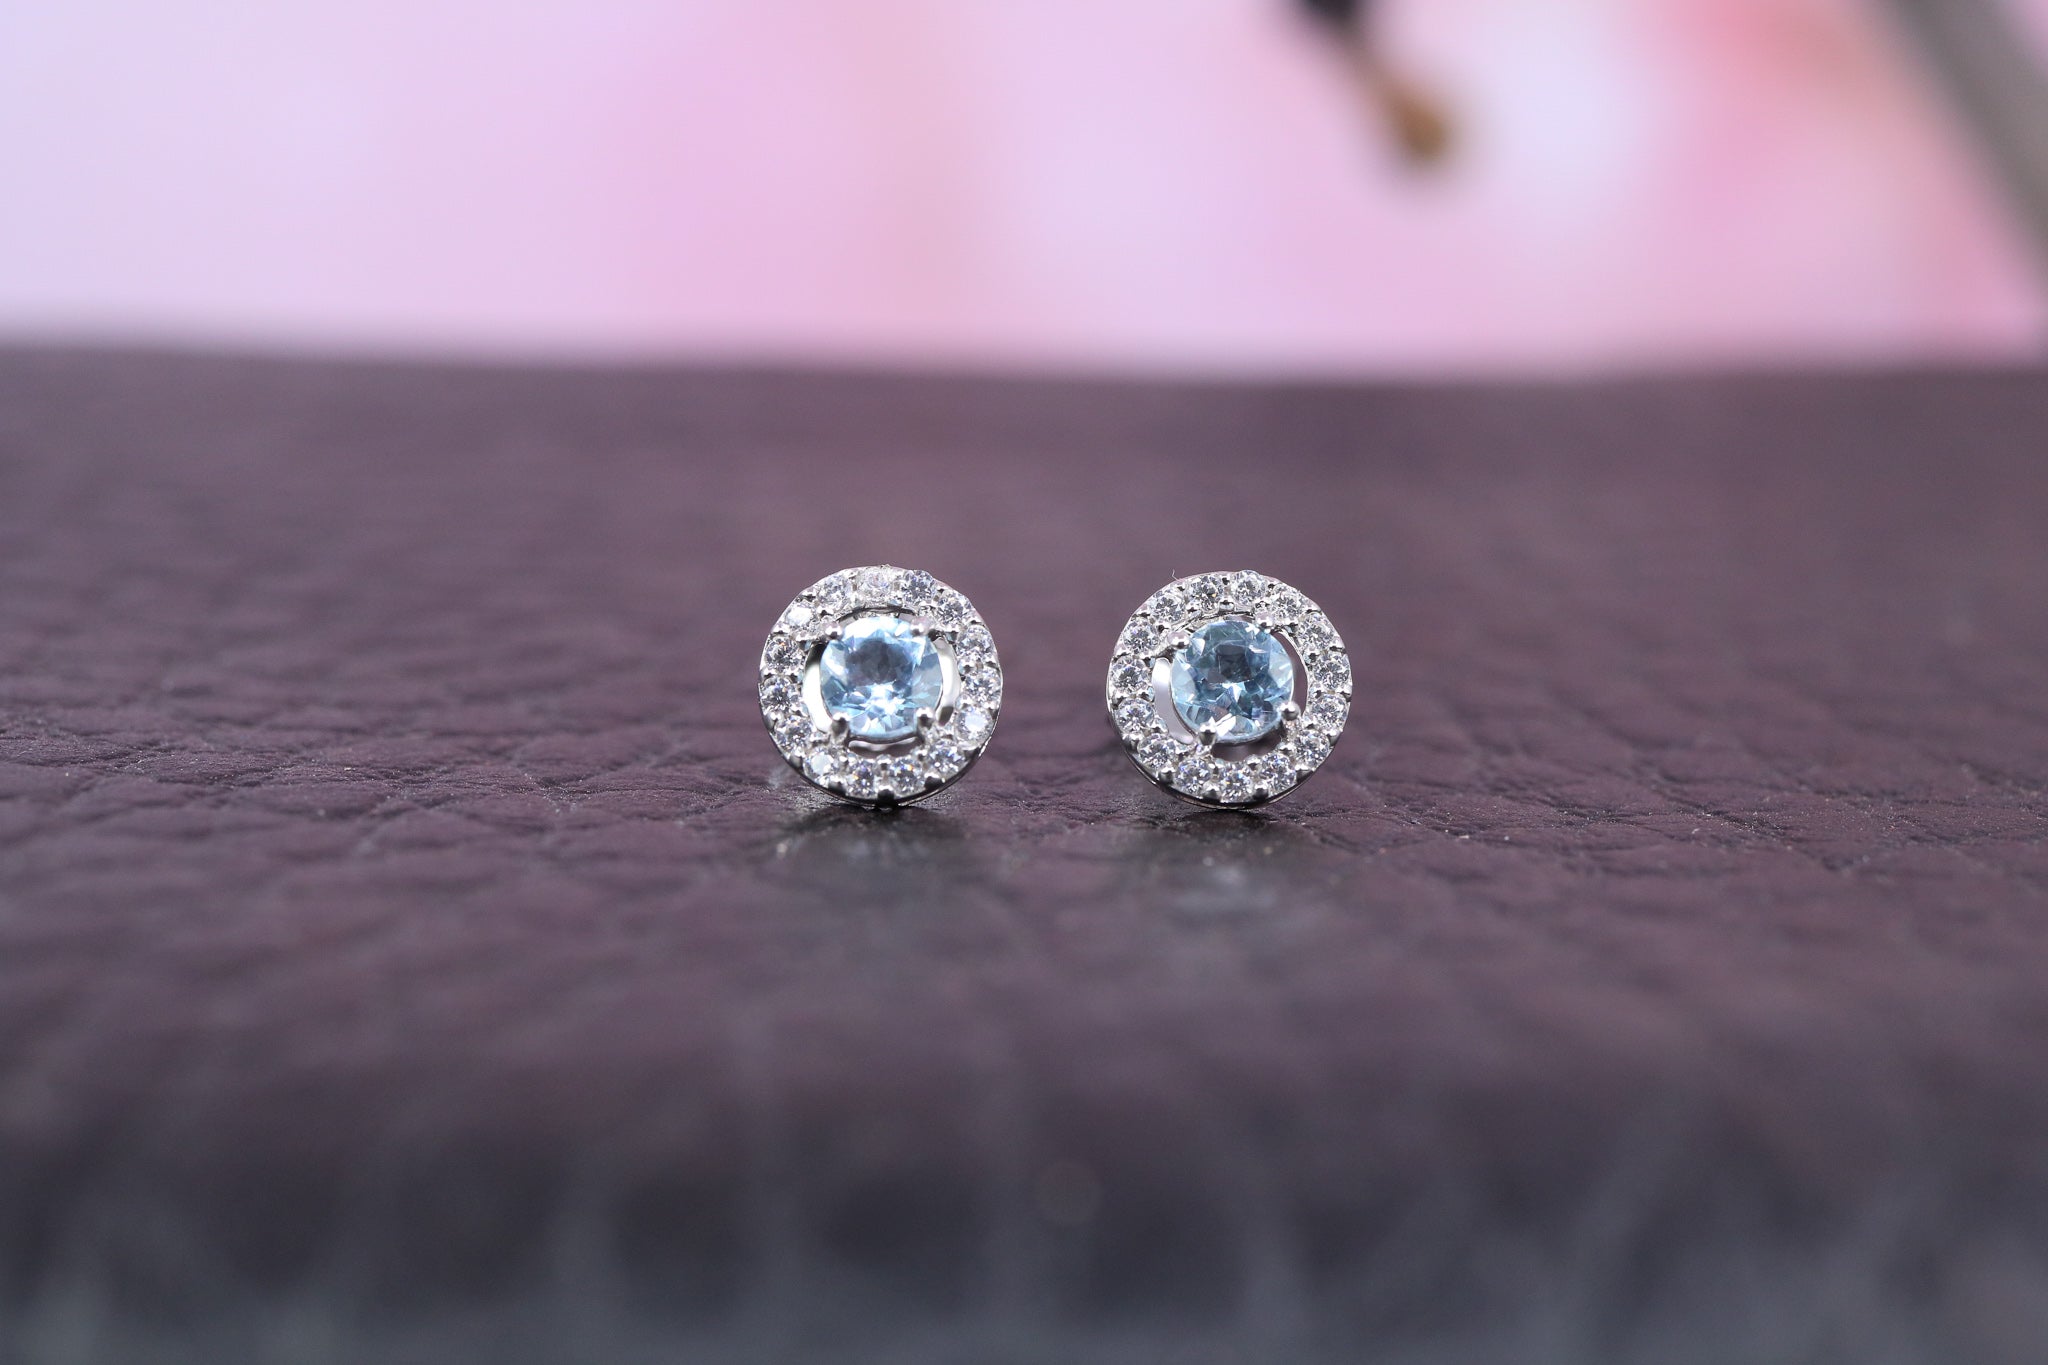 Sterling Silver & CZ Earrings - IN1114 - Hallmark Jewellers Formby & The Jewellers Bench Widnes